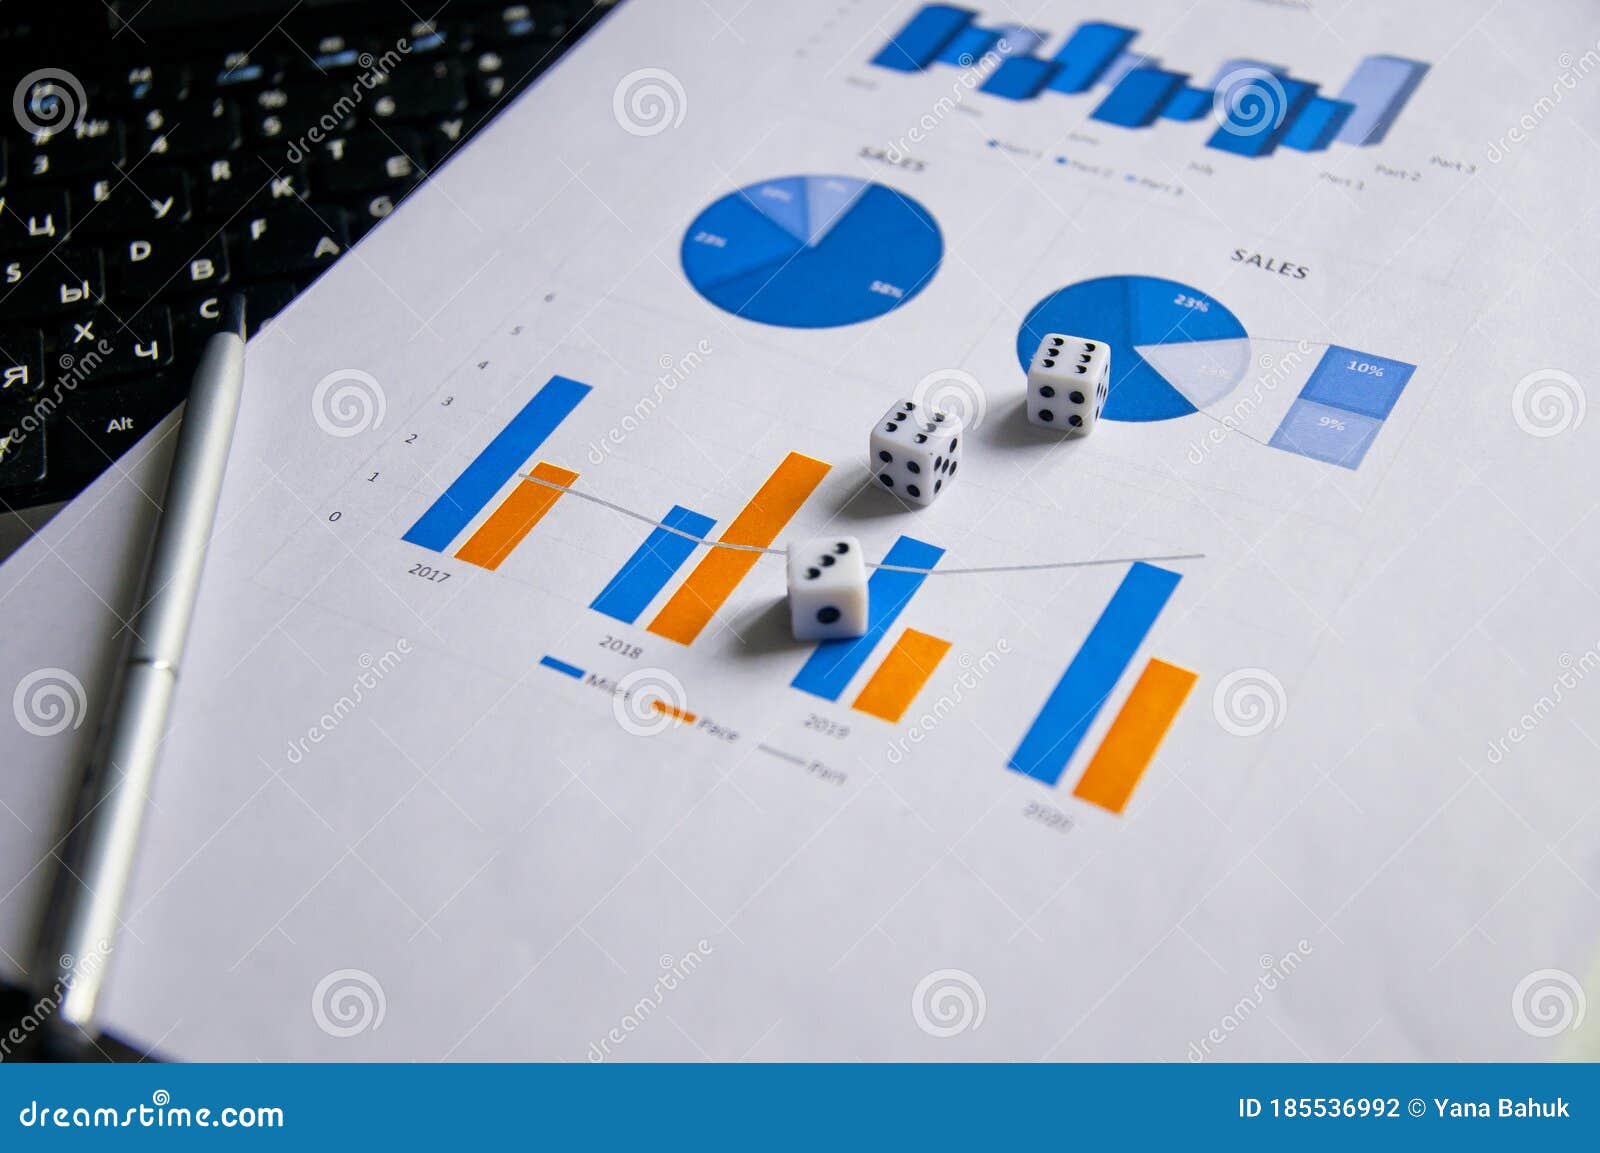 showing business and financial report. accounting. business ideas concept with dice gambling risk currency on keyboard and